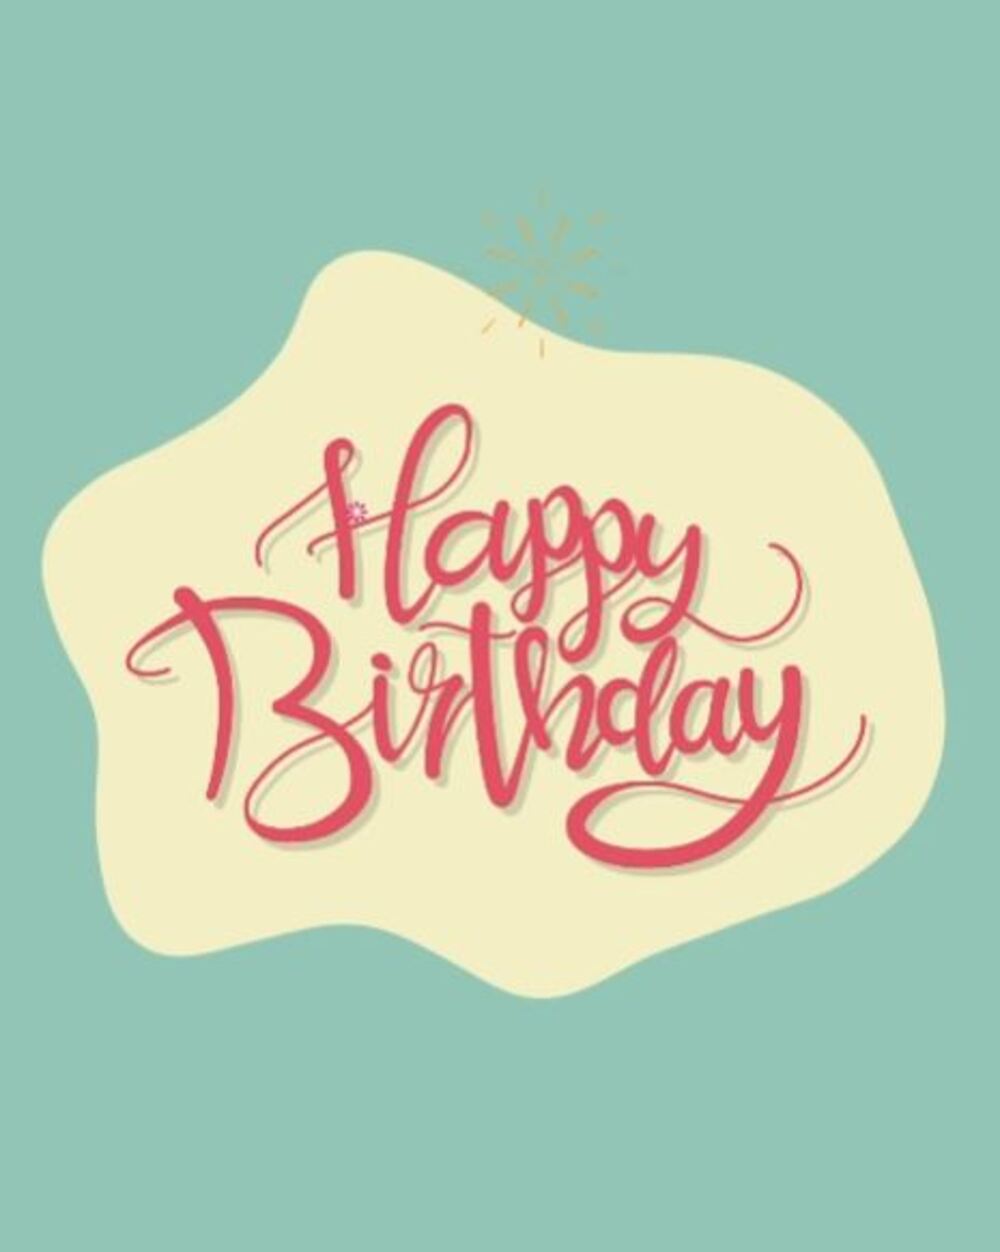 13 20+ Cute and Funny Happy Birthday Free Animated GIFs